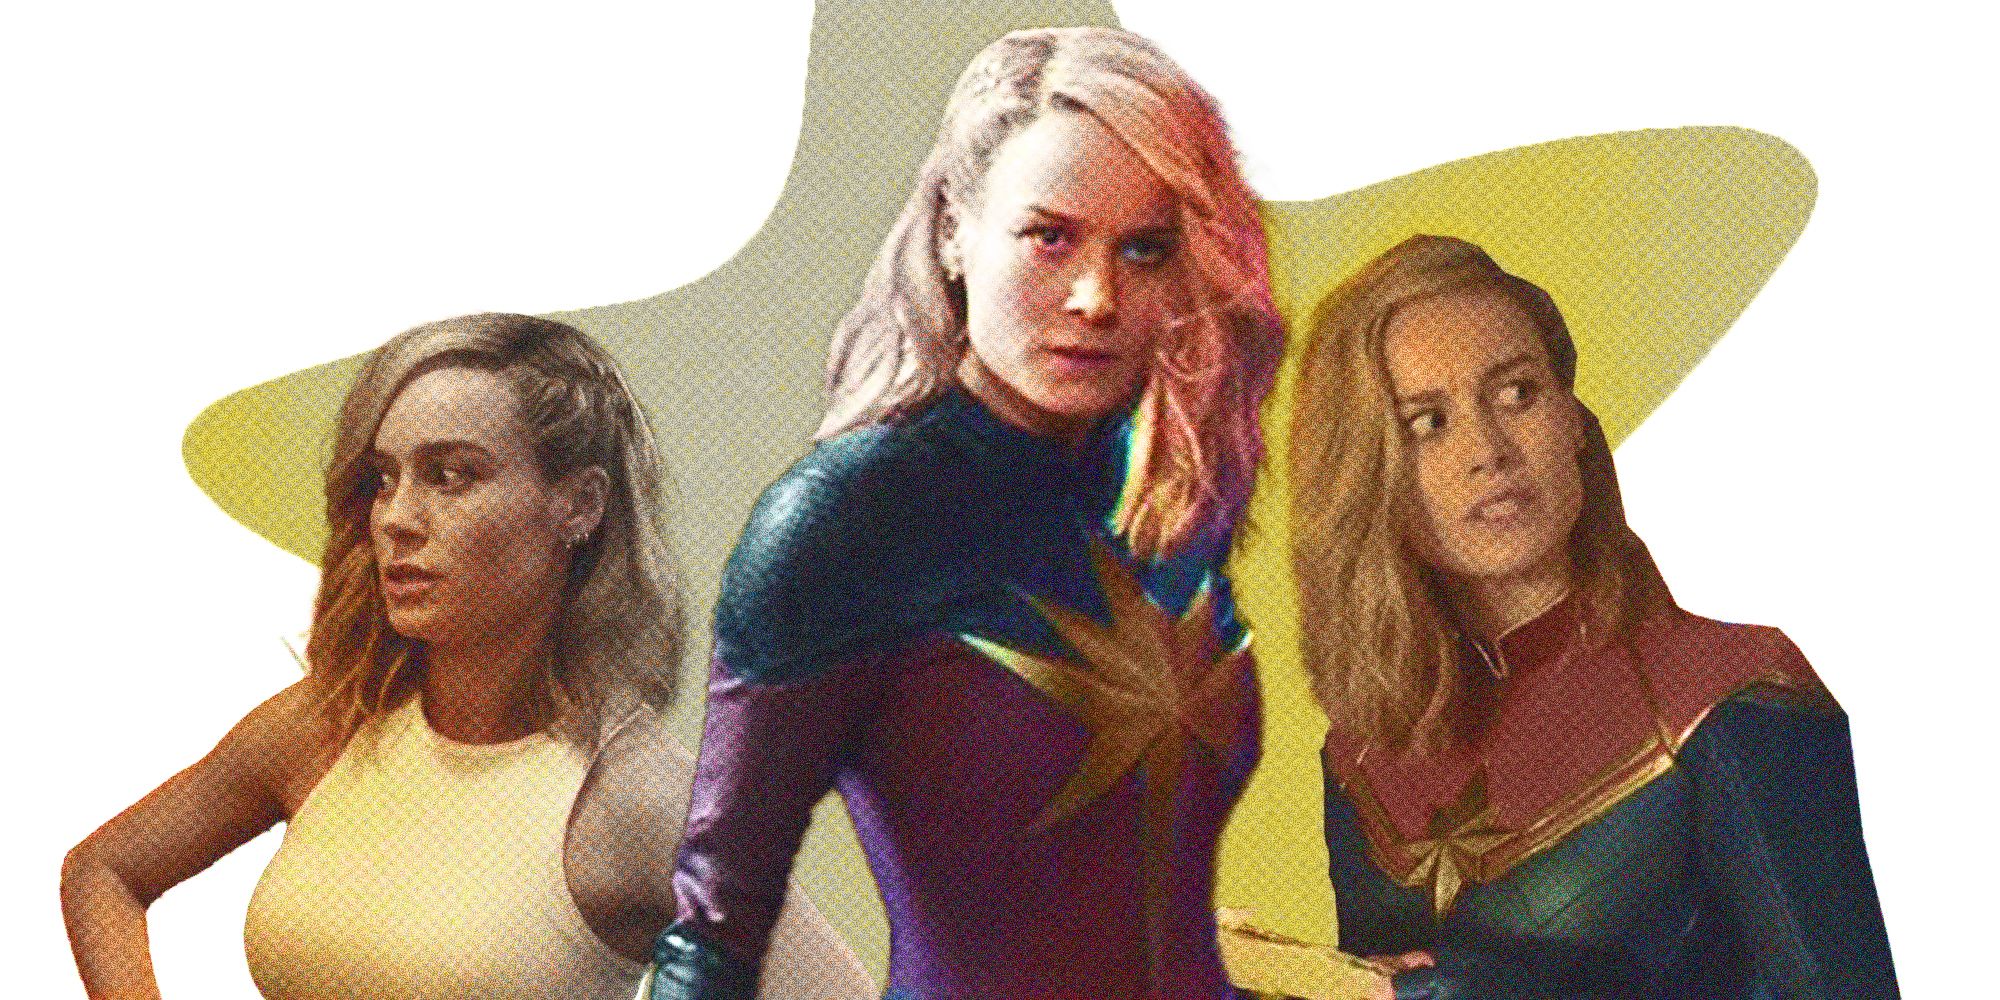 Brie Larson pictures from The Marvels